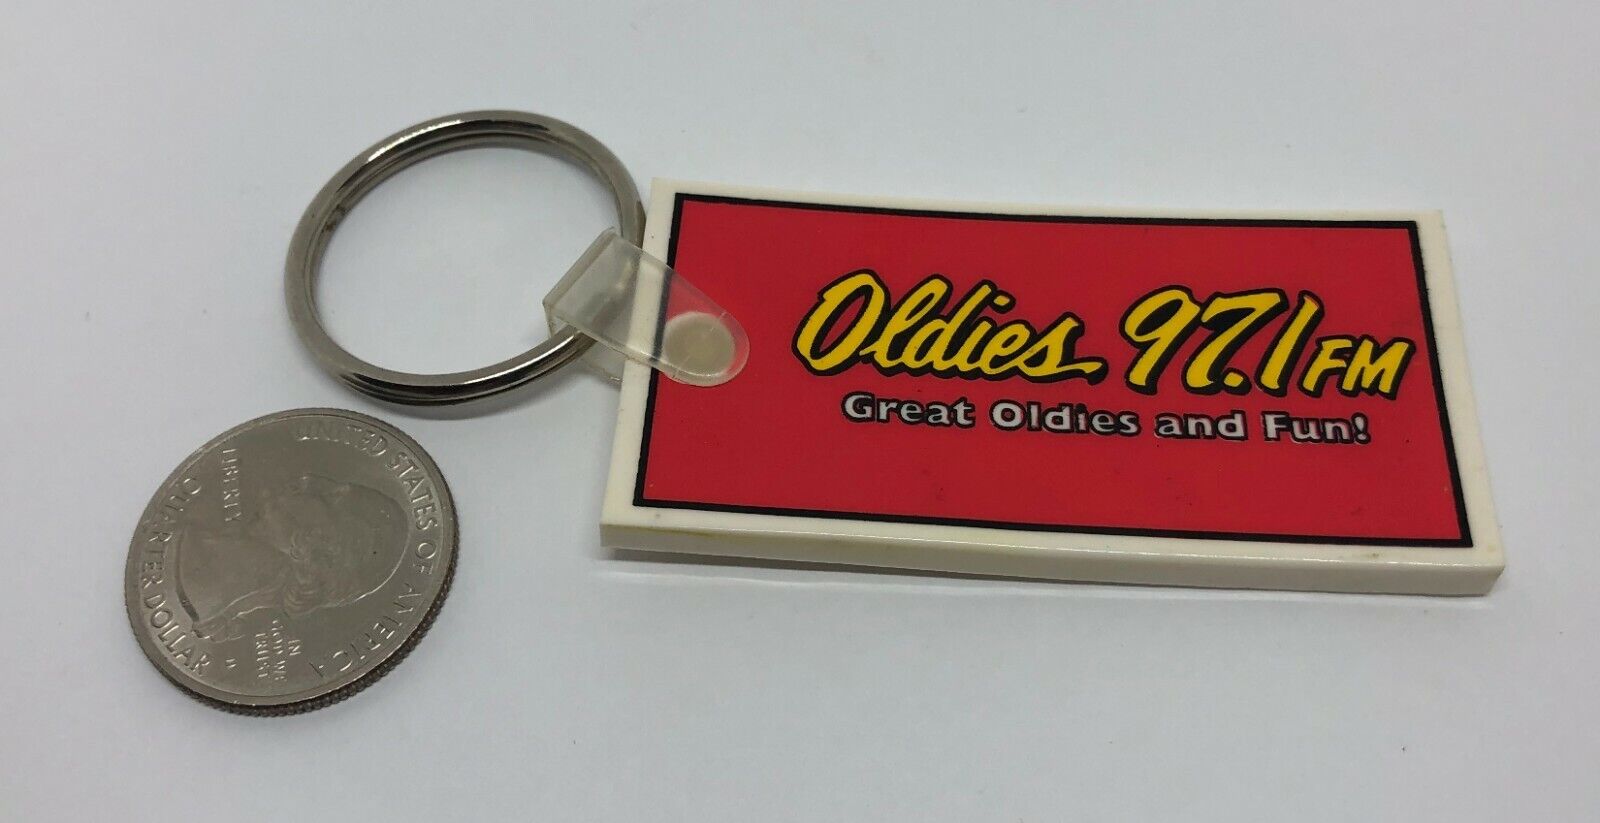 Oldies 97.1 FM Great Oldies And Fun Rubber Key Ring Keychain